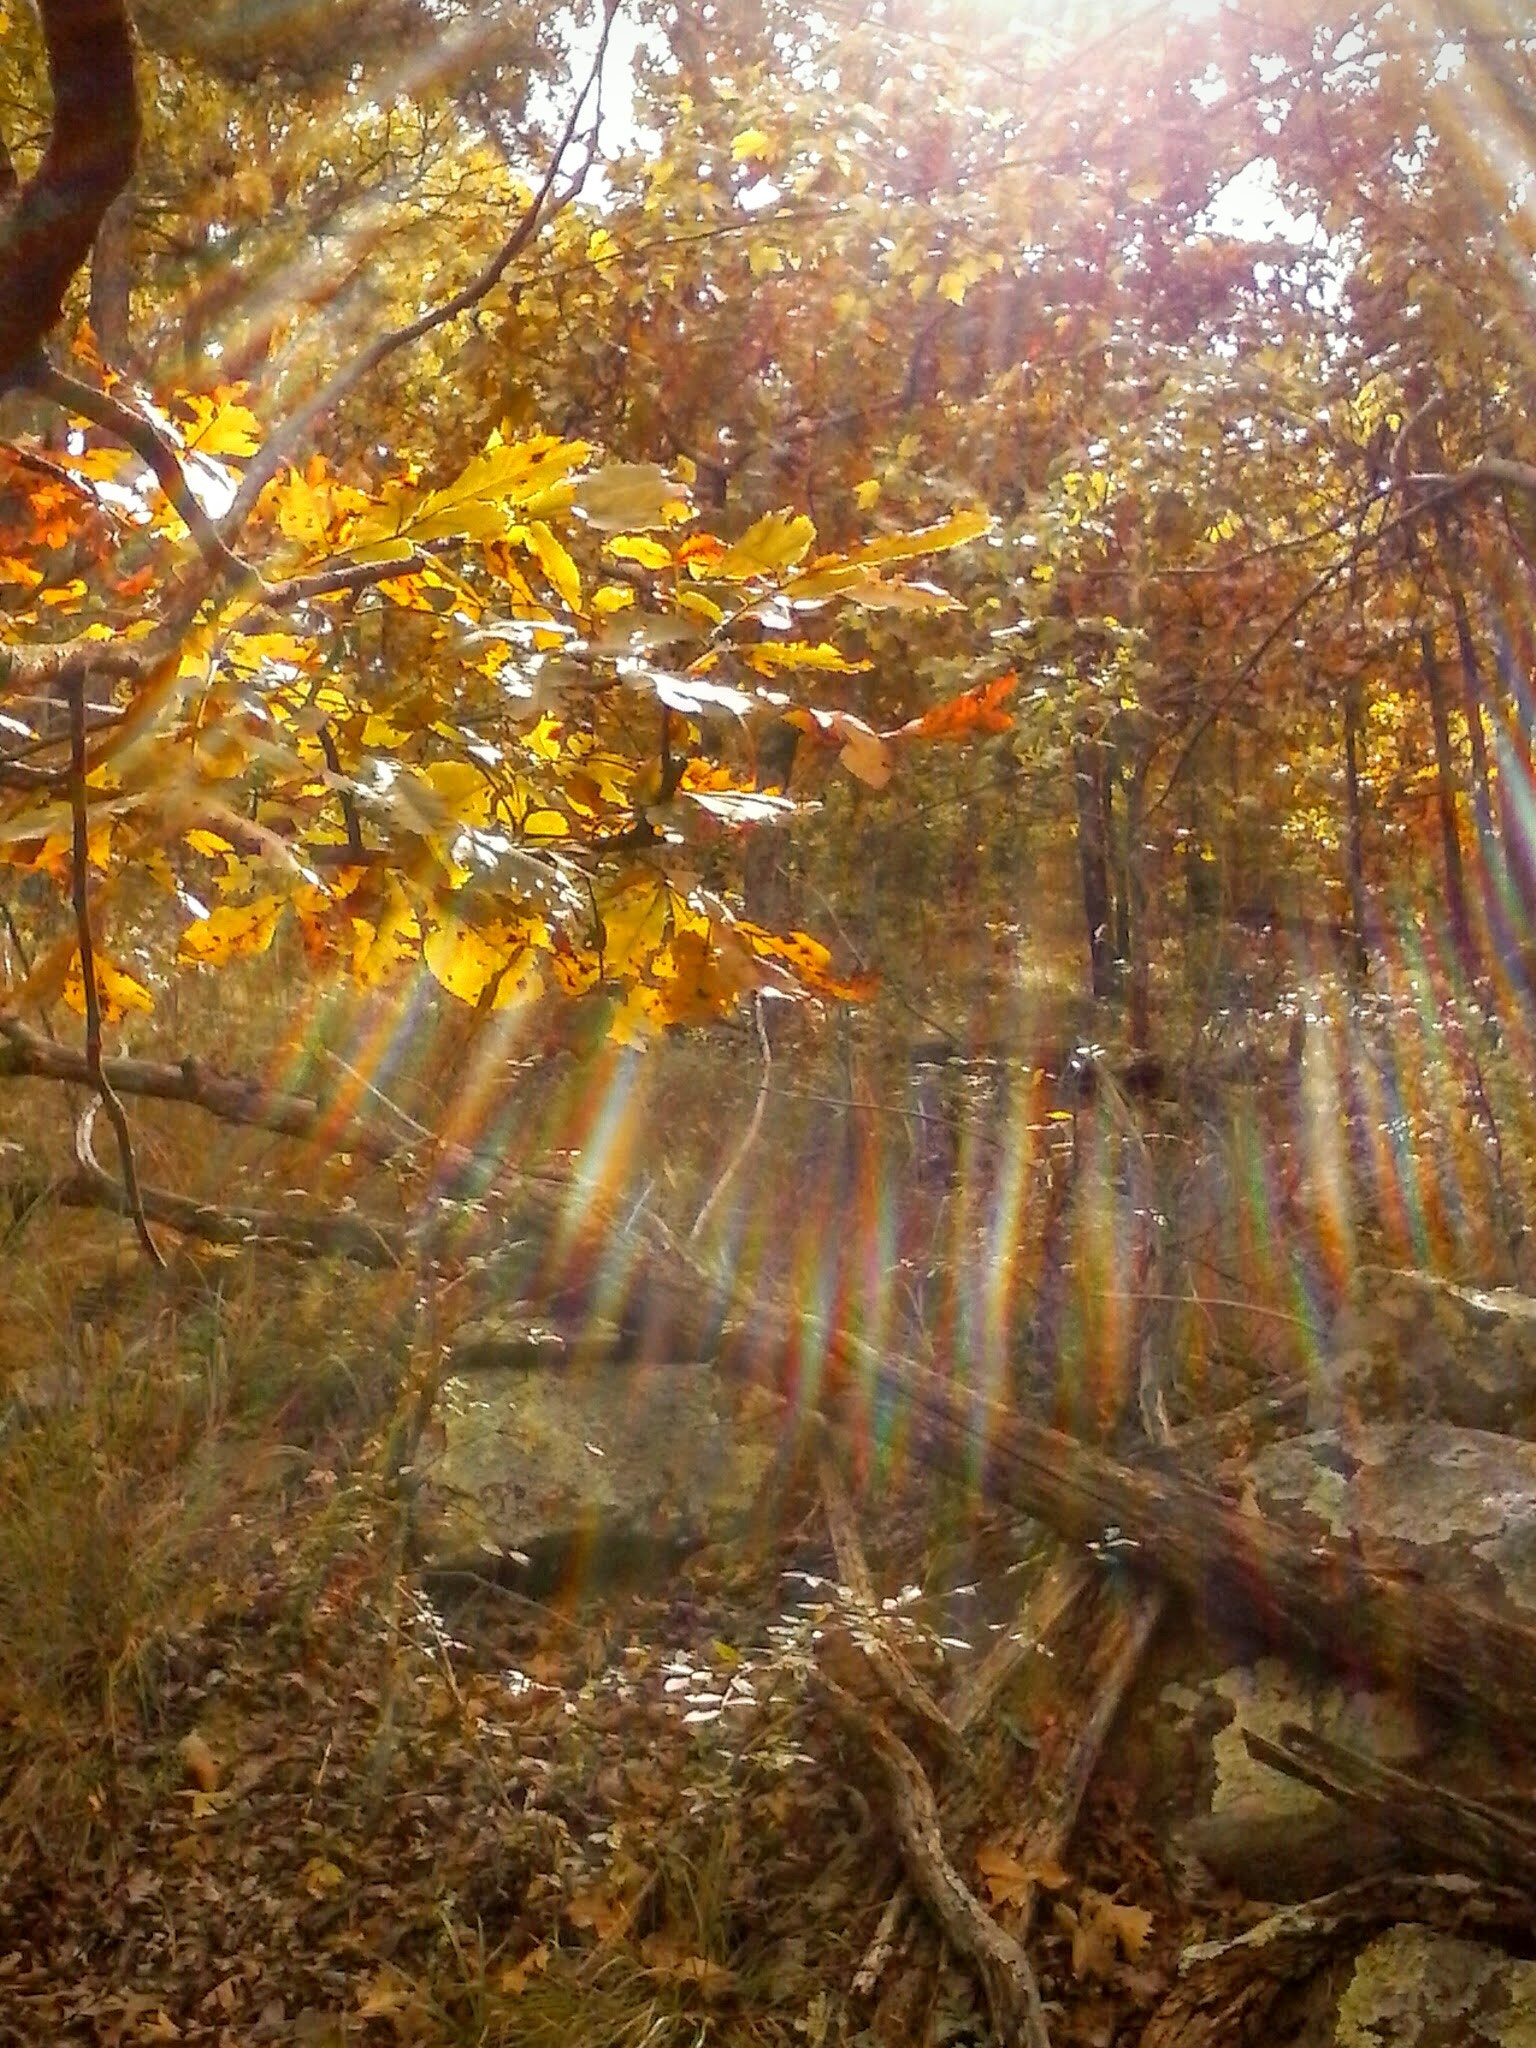 LG OPTIMUS L3 II sample photo. October in the ouachita mountains iii photography